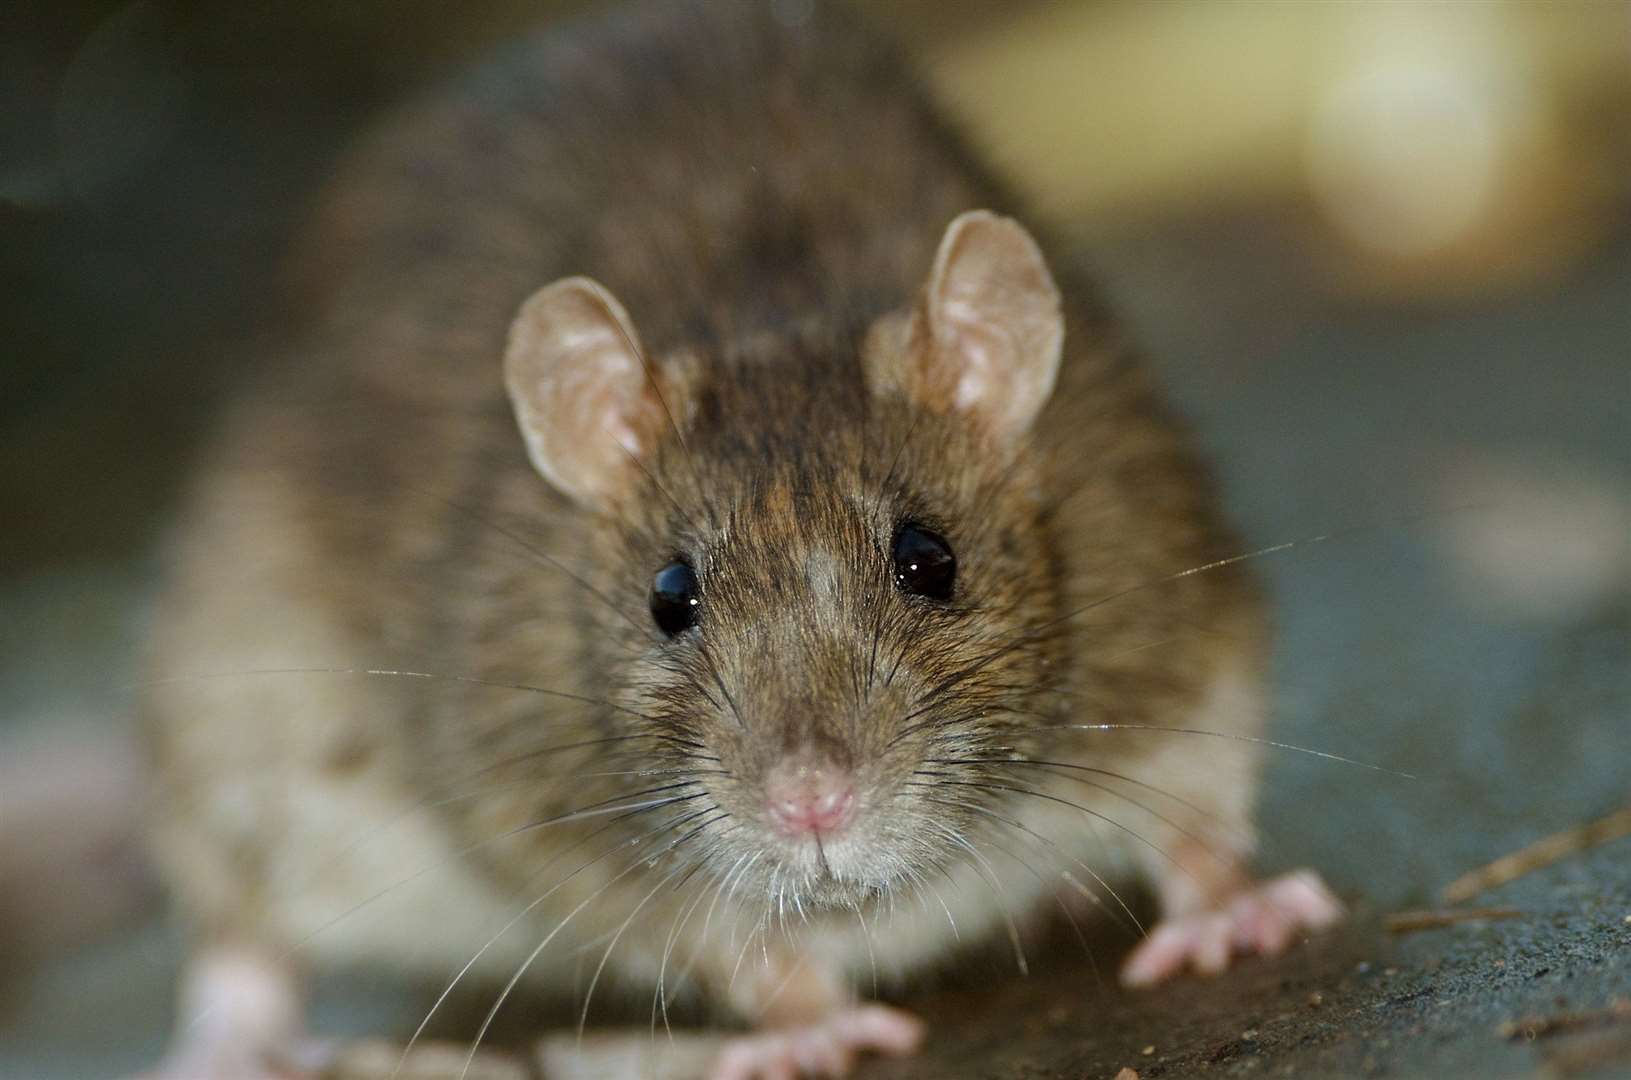 The disease can be picked up through rats. Library image